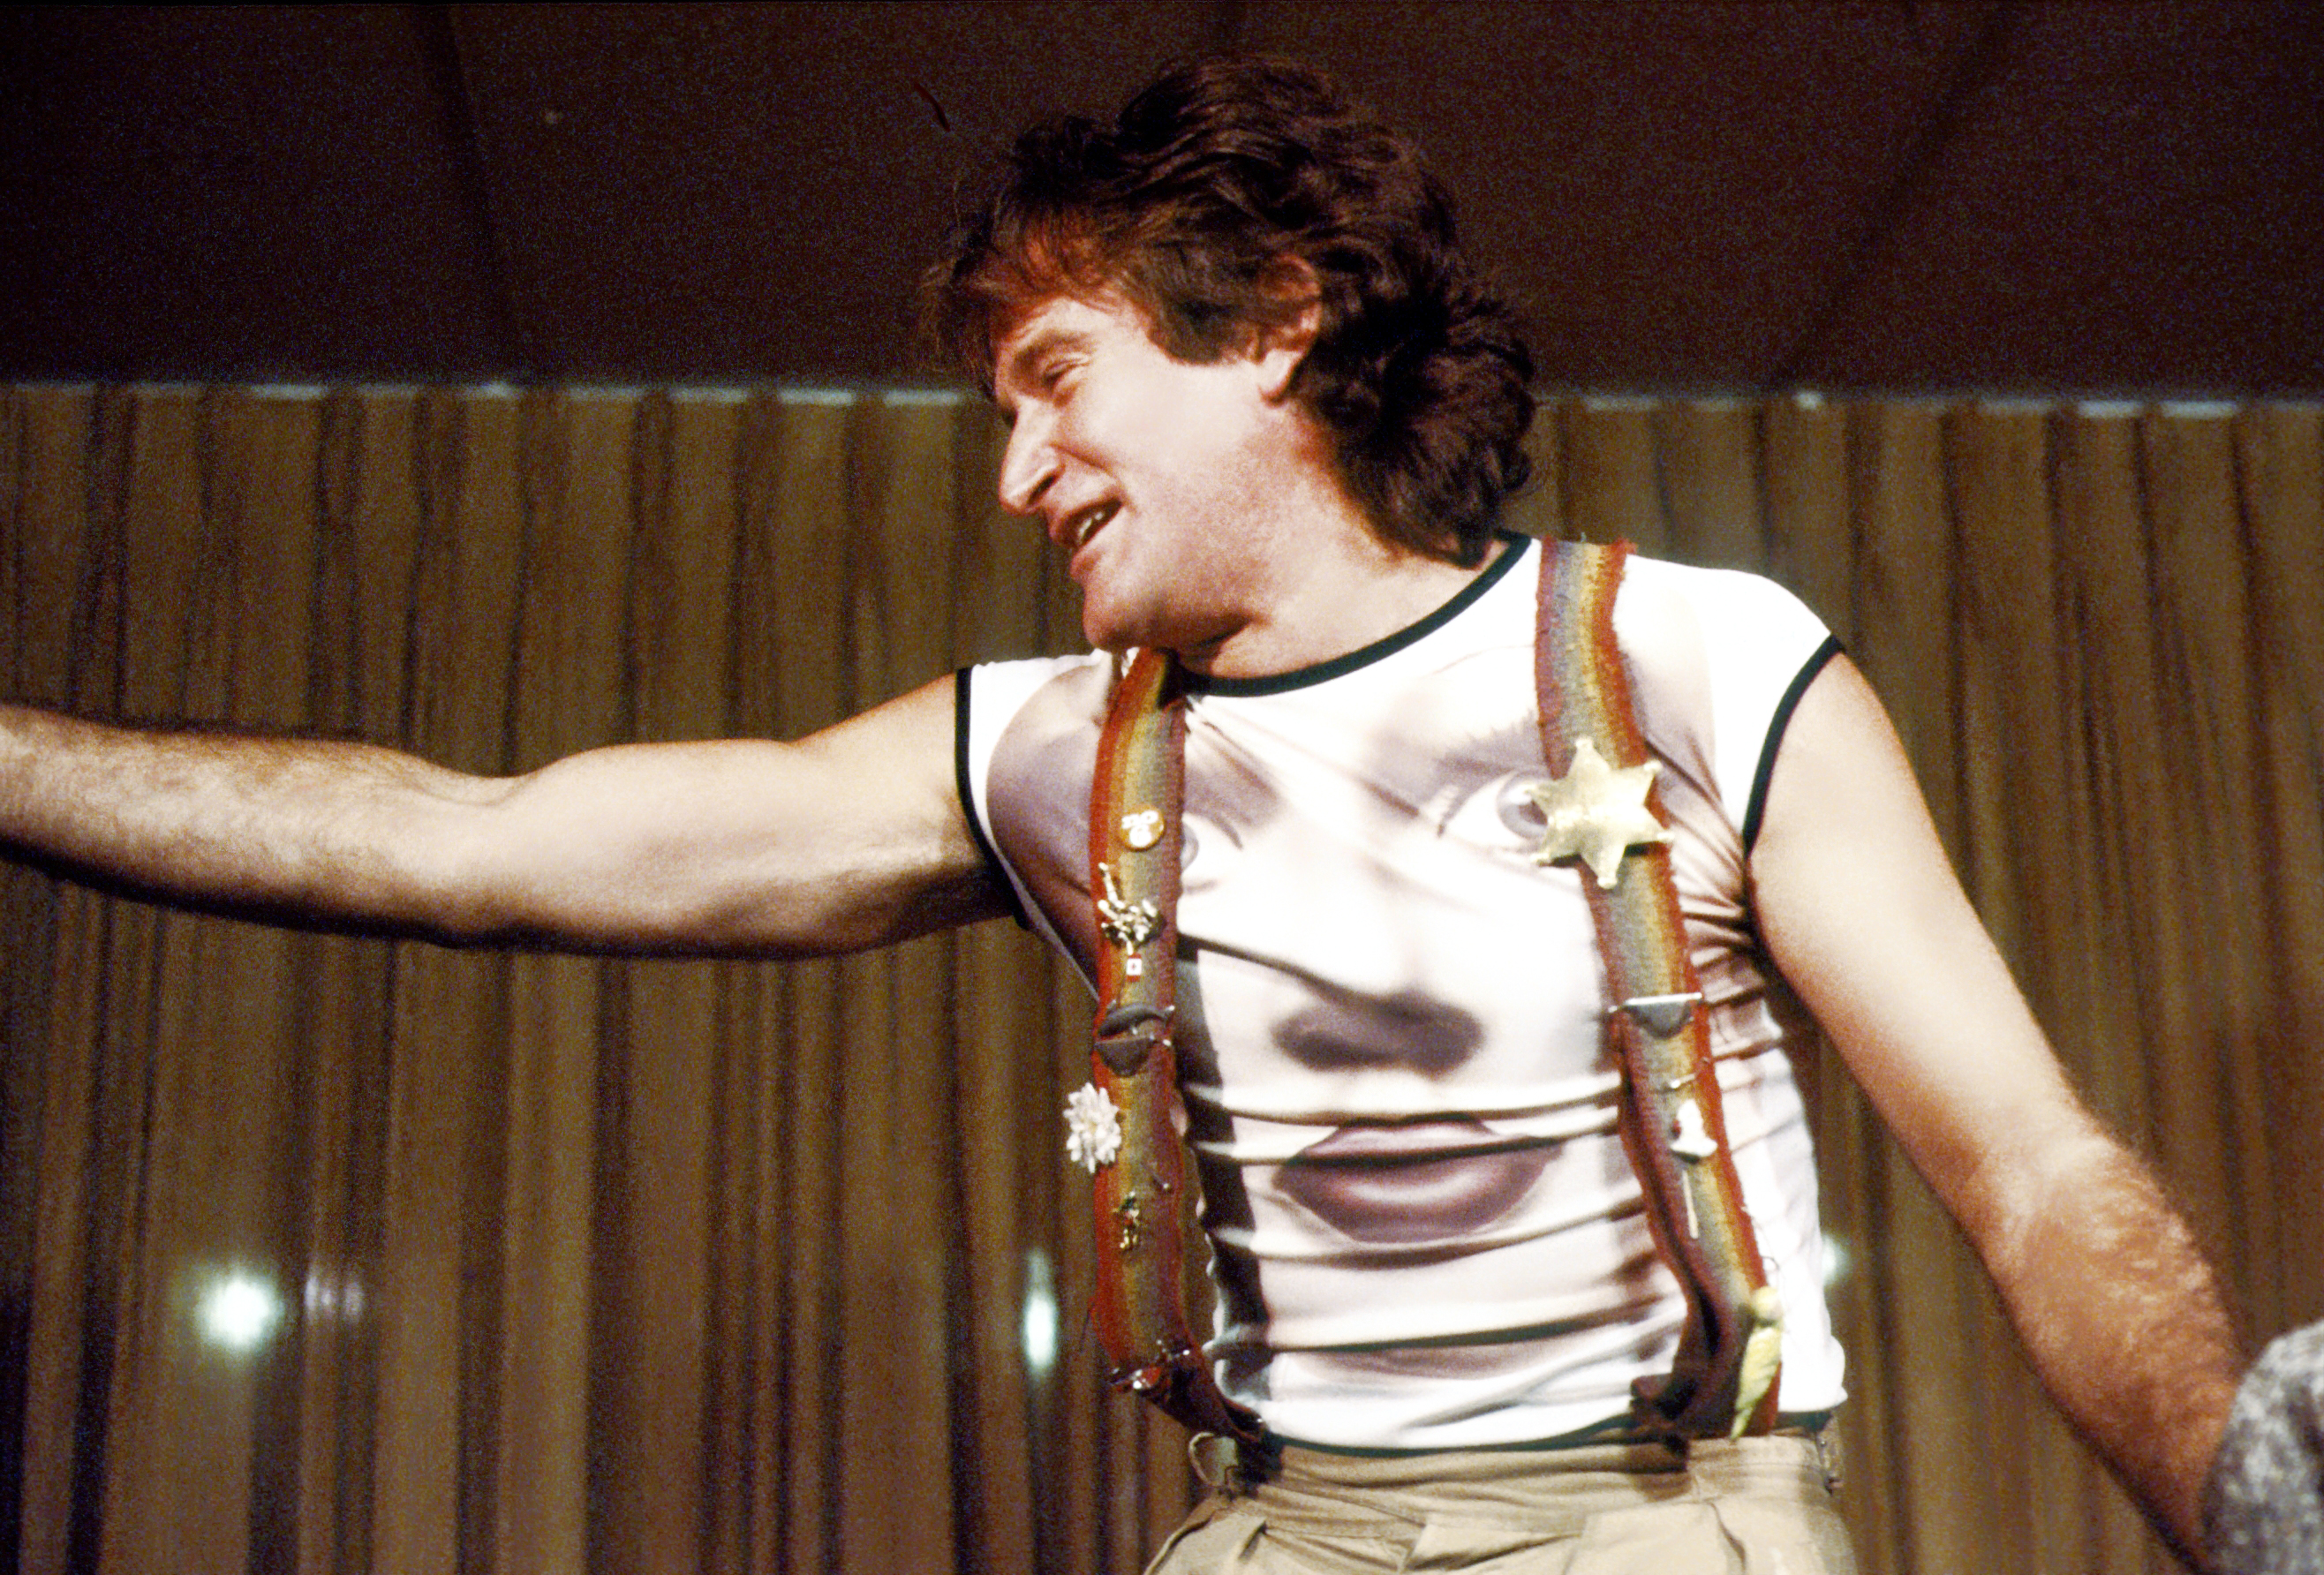 Robin Williams wearing rainbow suspenders and a face print t-shirt performing on stage at the Roxy Theater in 1979